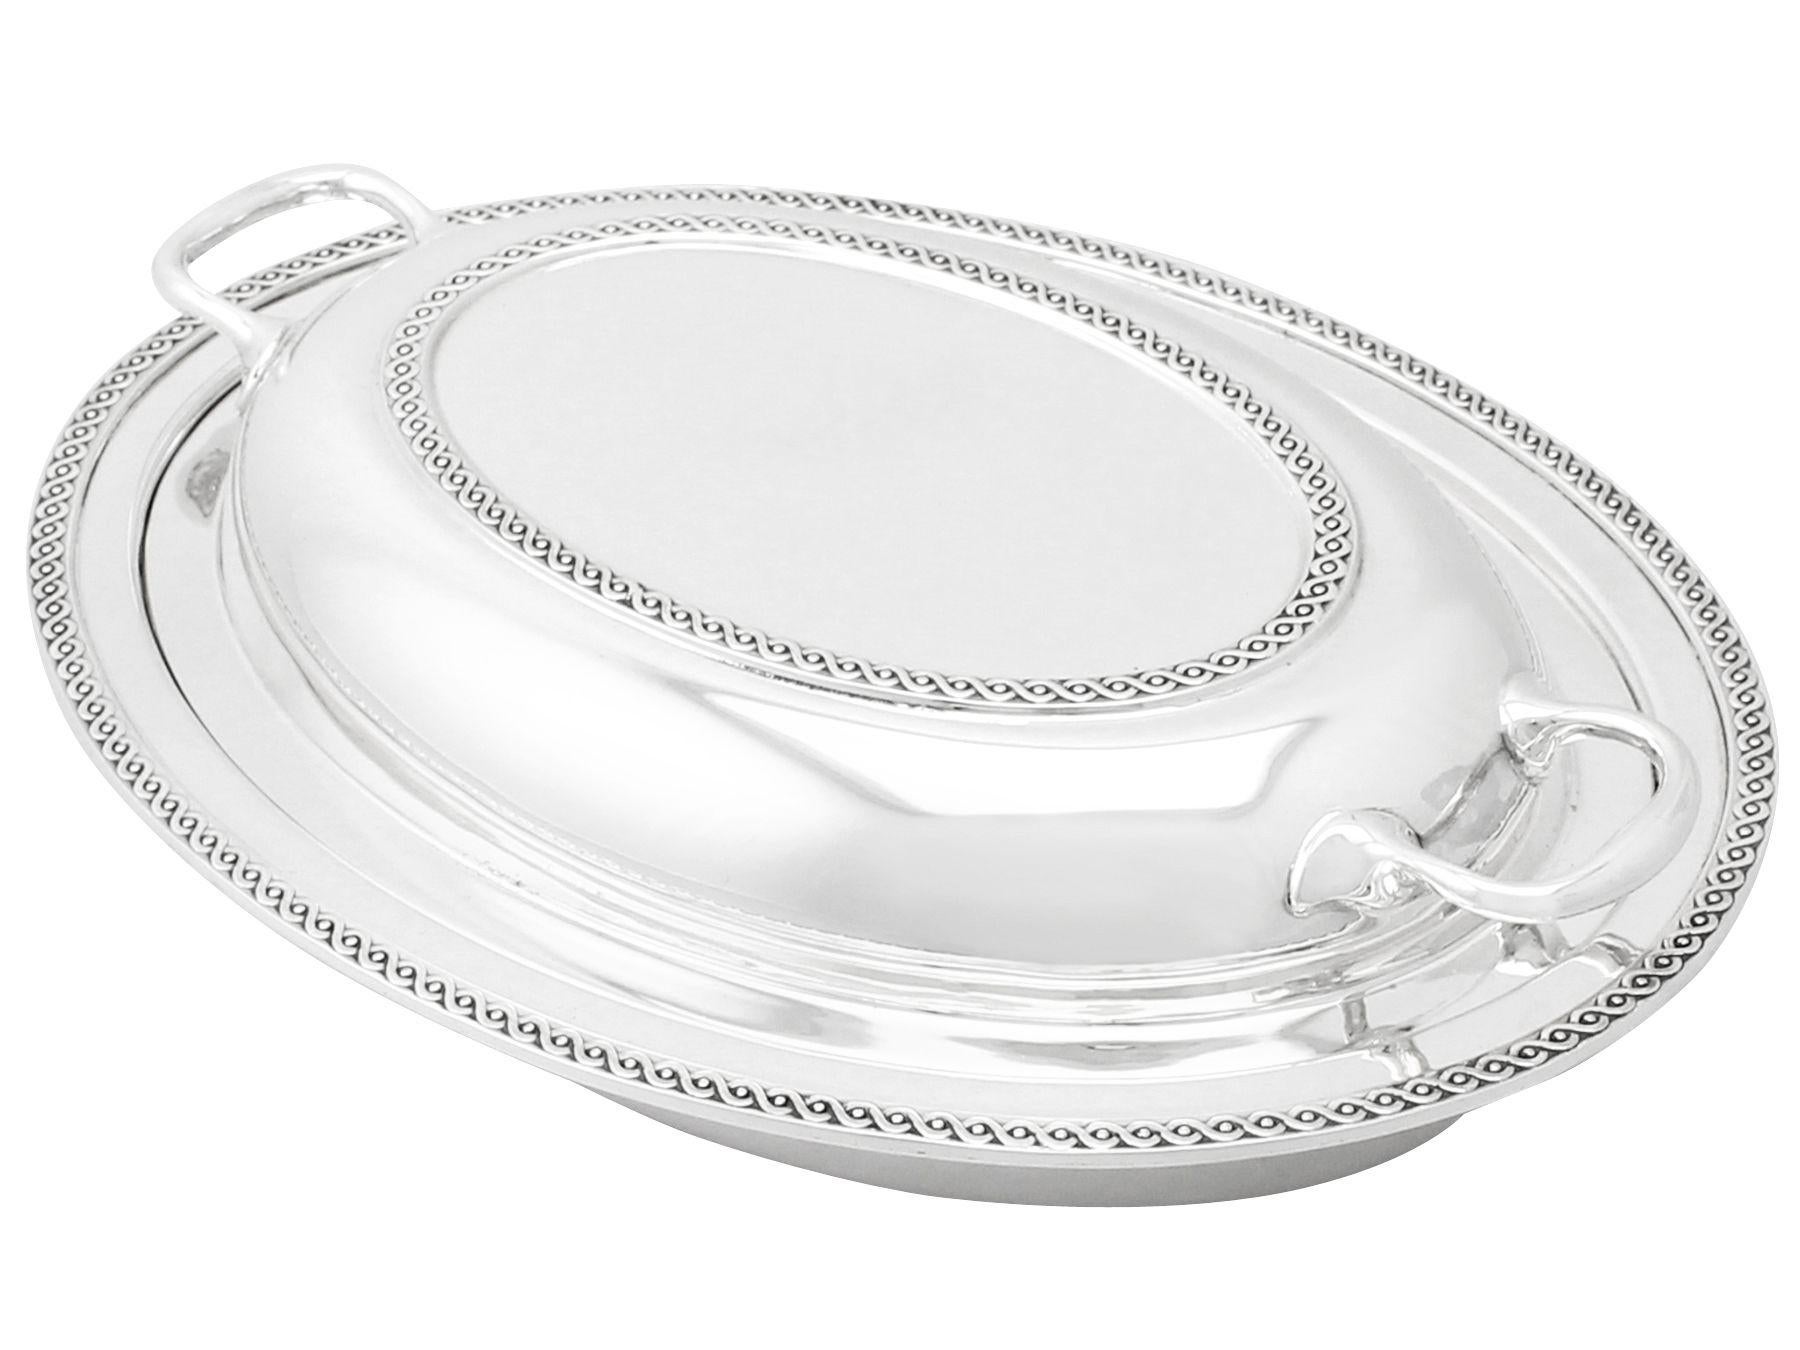 An exceptional, fine and impressive antique George V English sterling silver entree dish; an addition to our ornamental dining silverware collection.

This impressive antique George V sterling silver entree dish has a plain oval rounded